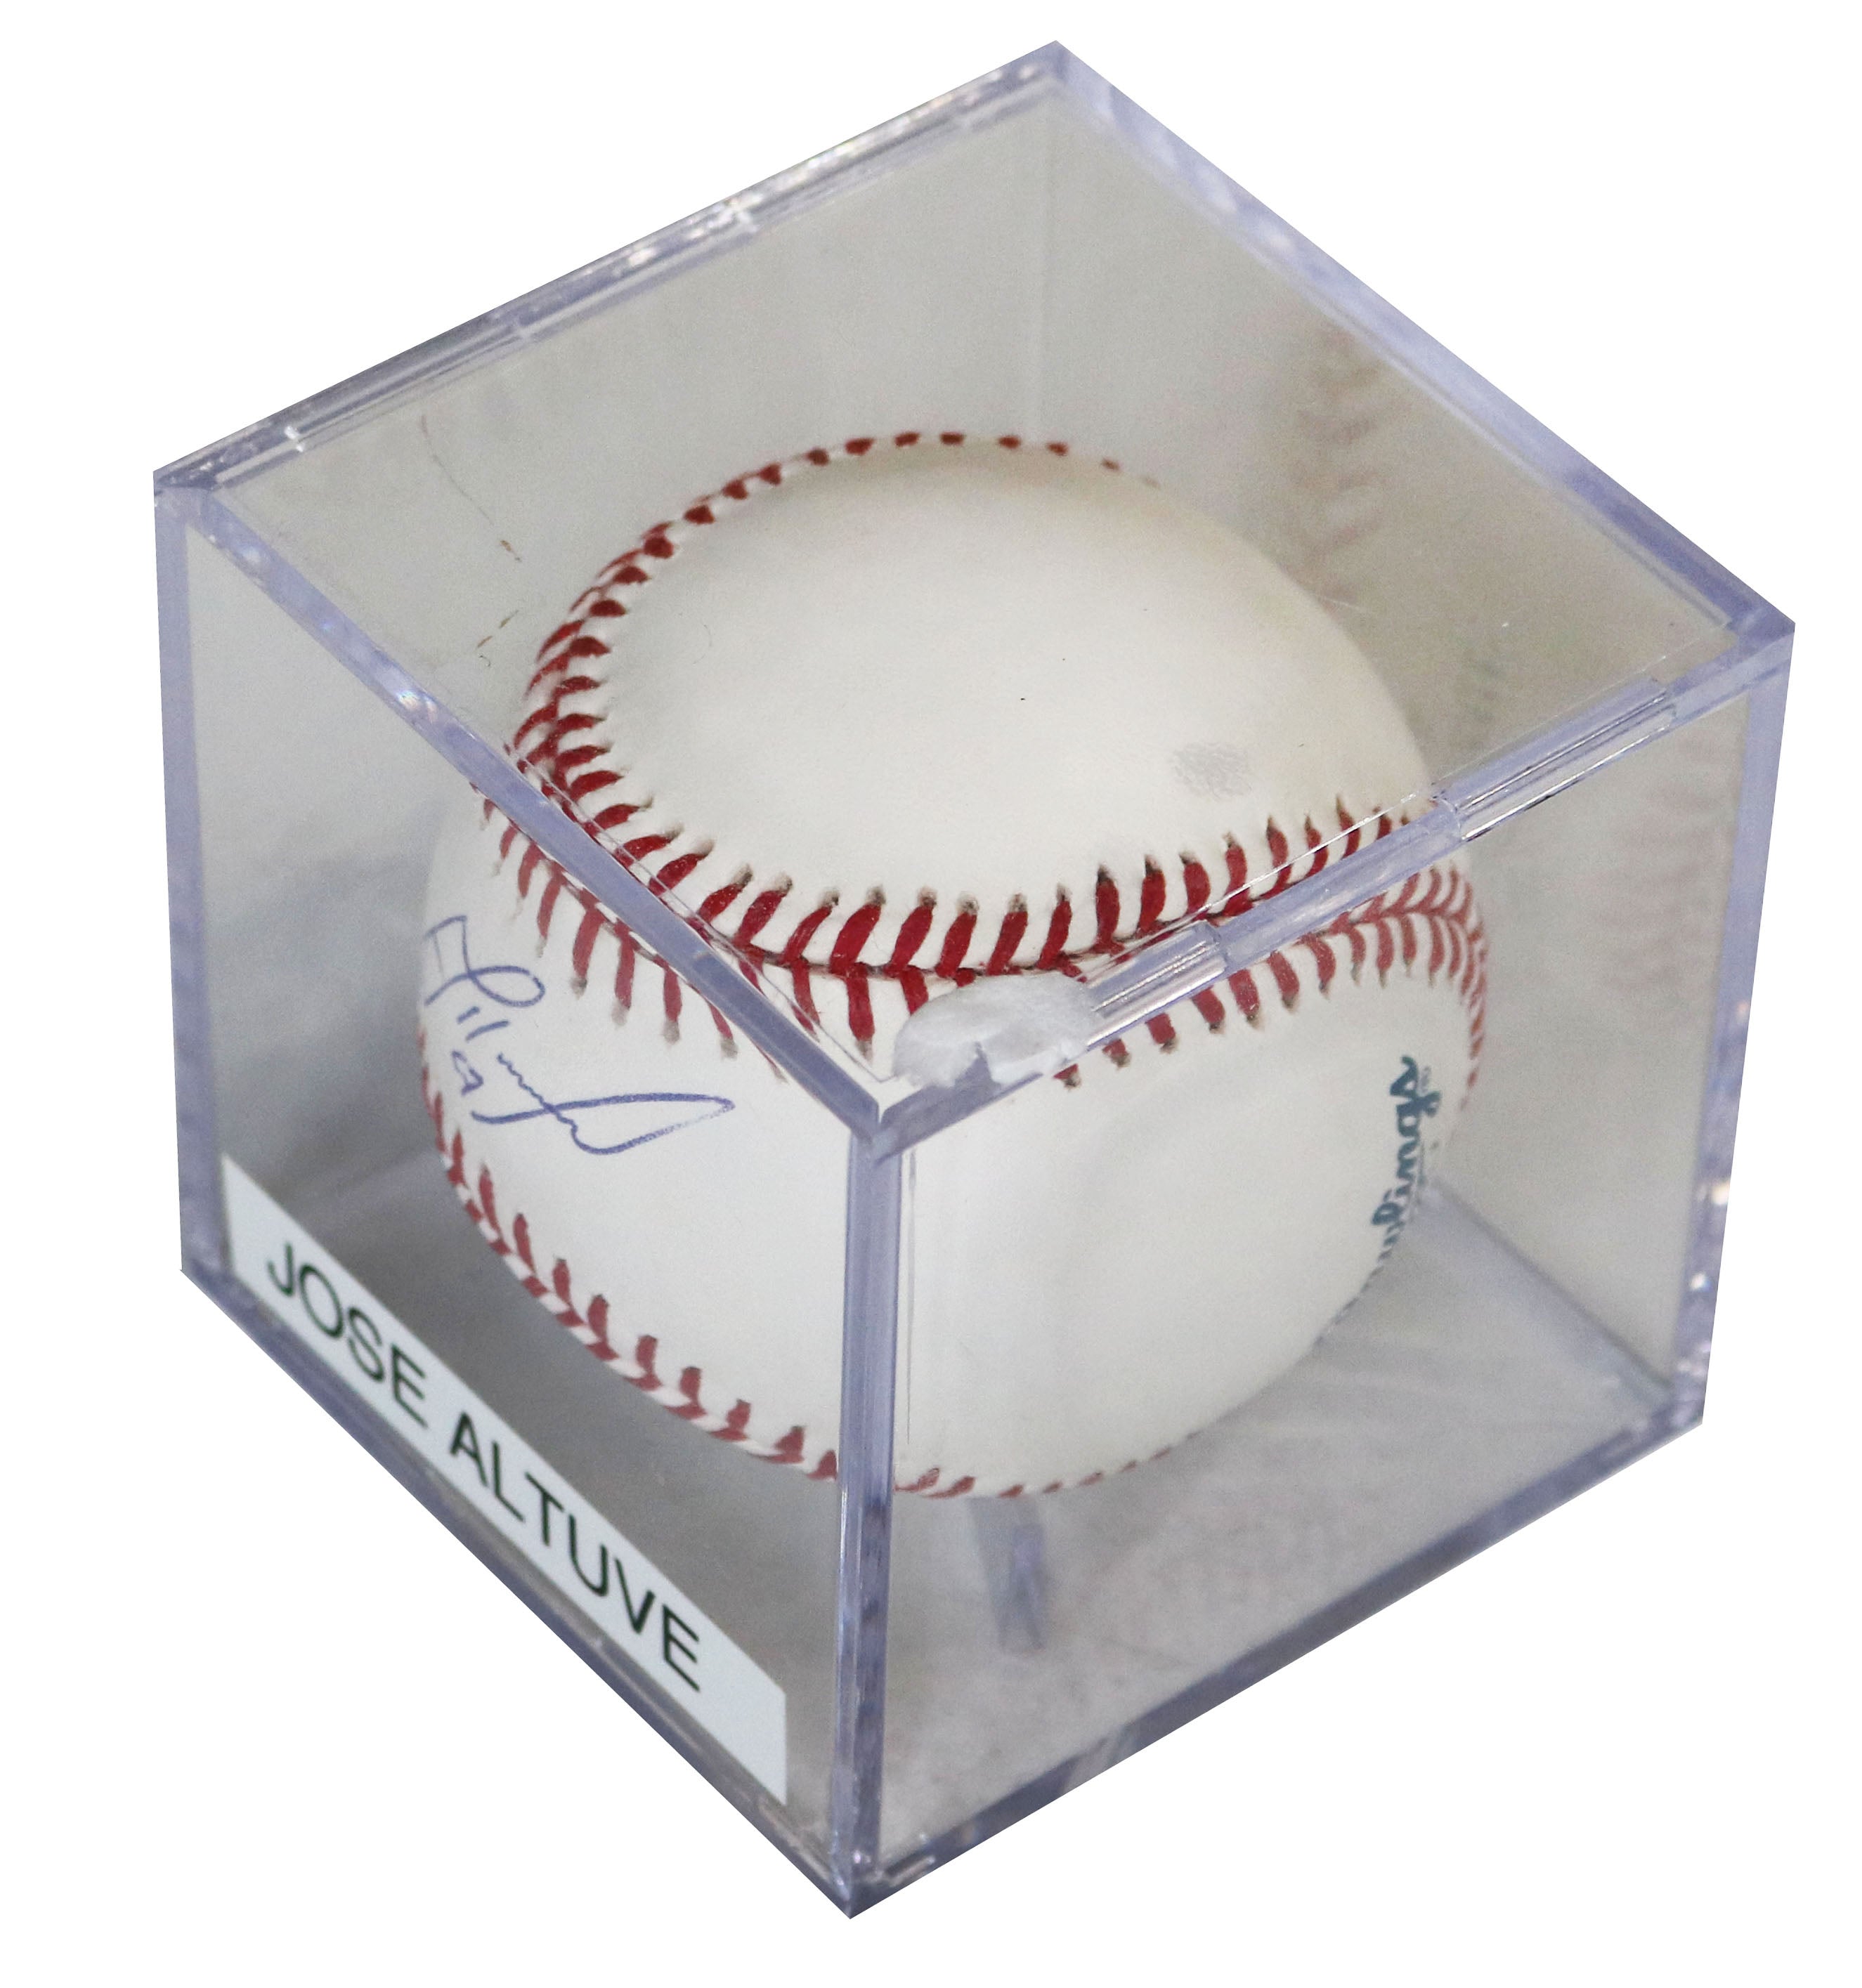 Jose Altuve Houston Astros Signed Autographed Rawlings Official Major League Baseball with Display Holder